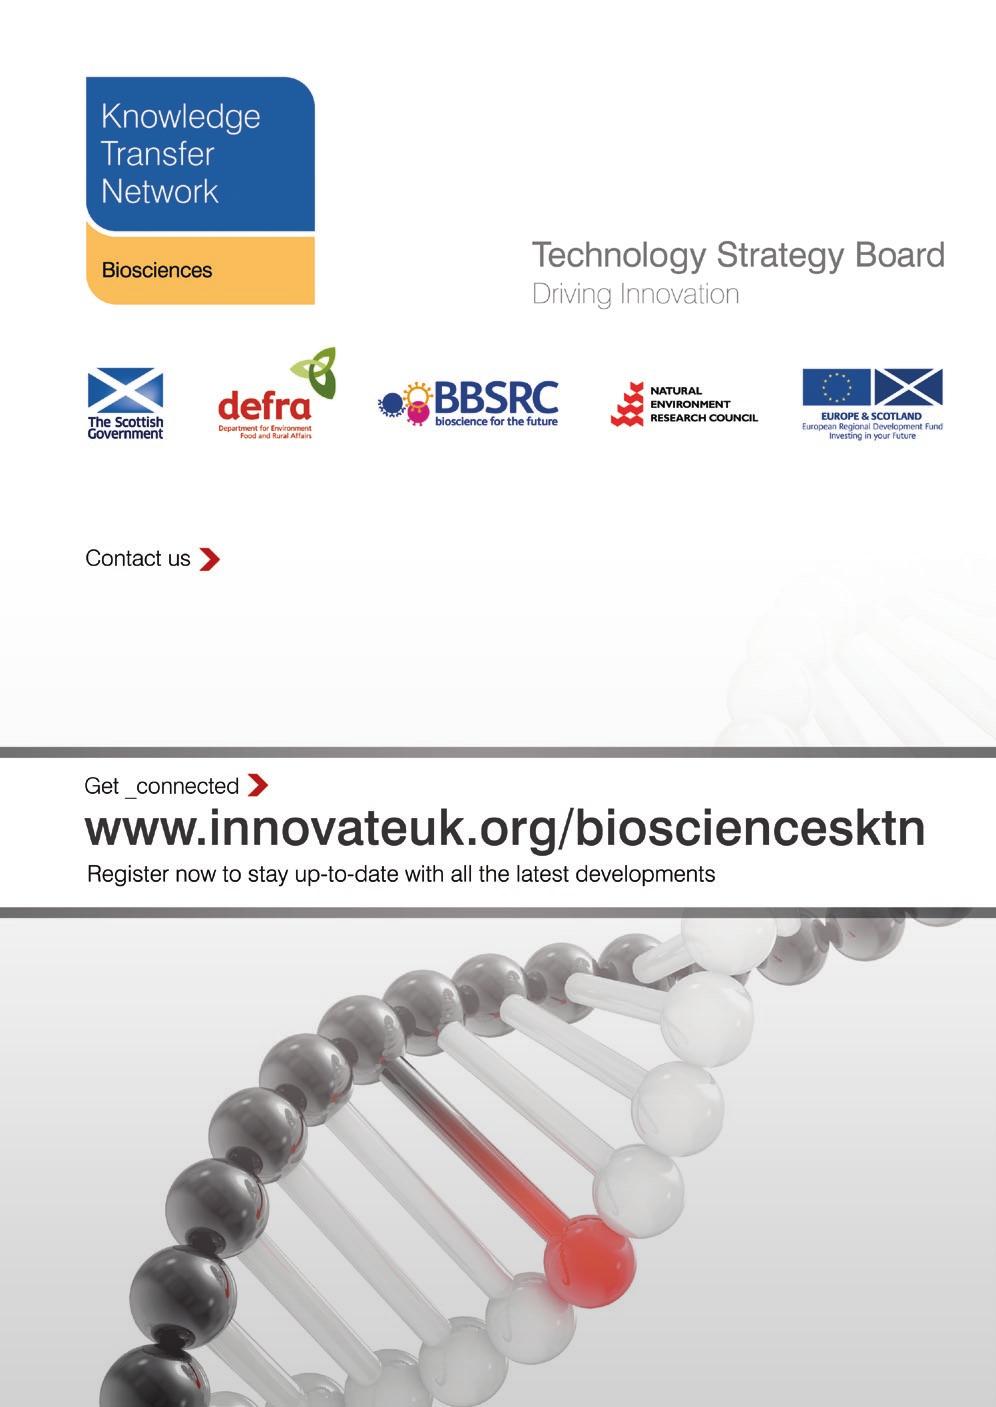 Biosciences KTN is Sponsored by the Technology Strategy Board, the Scottish Government, European Regional Development Funds, Defra, BBSRC and NERC.